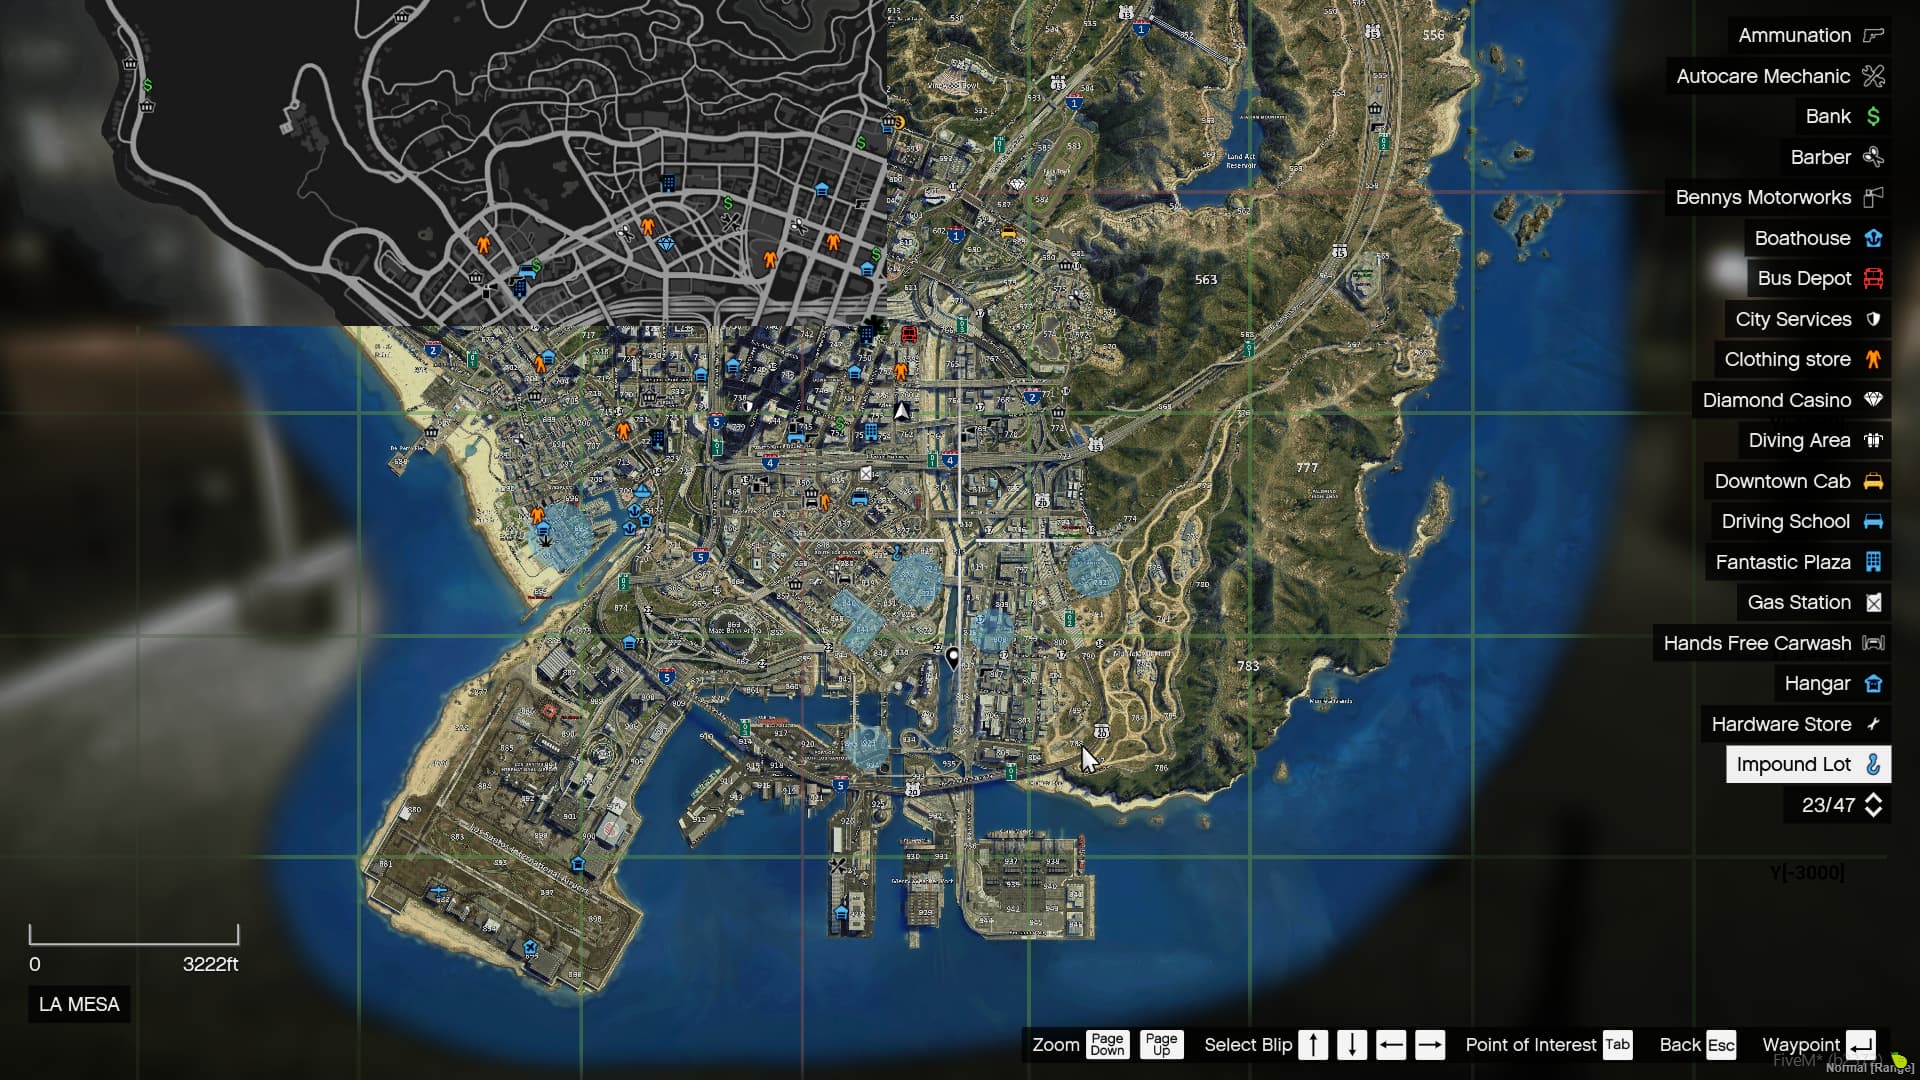 Adding postal maps in server side - Discussion - Cfx.re Community